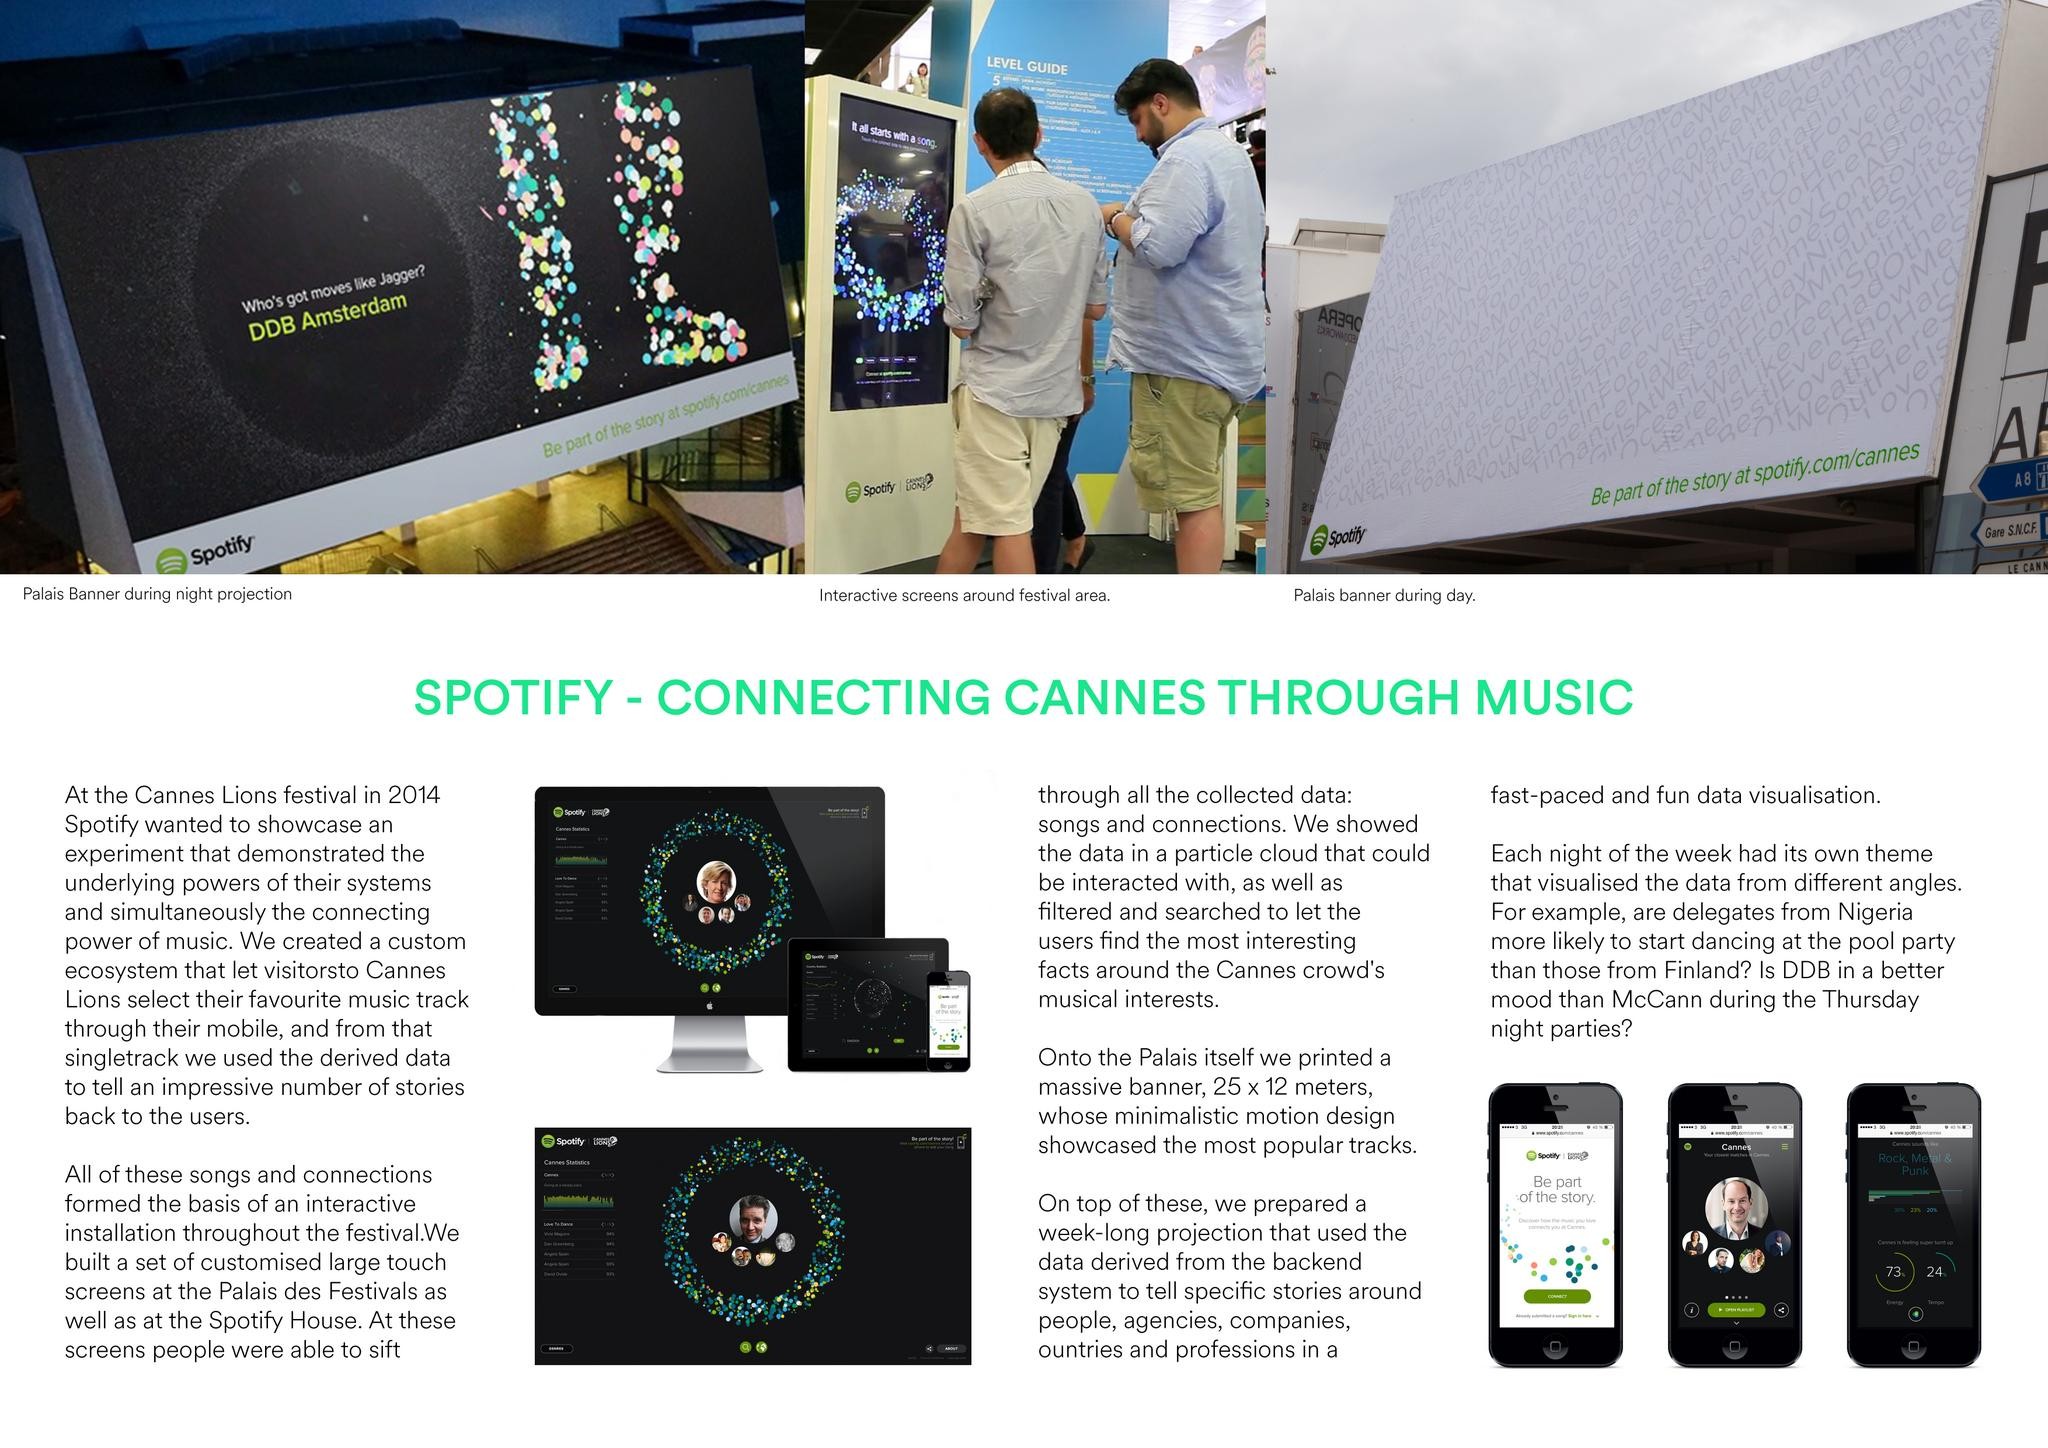 SPOTIFY - CONNECTING CANNES THROUGH MUSIC